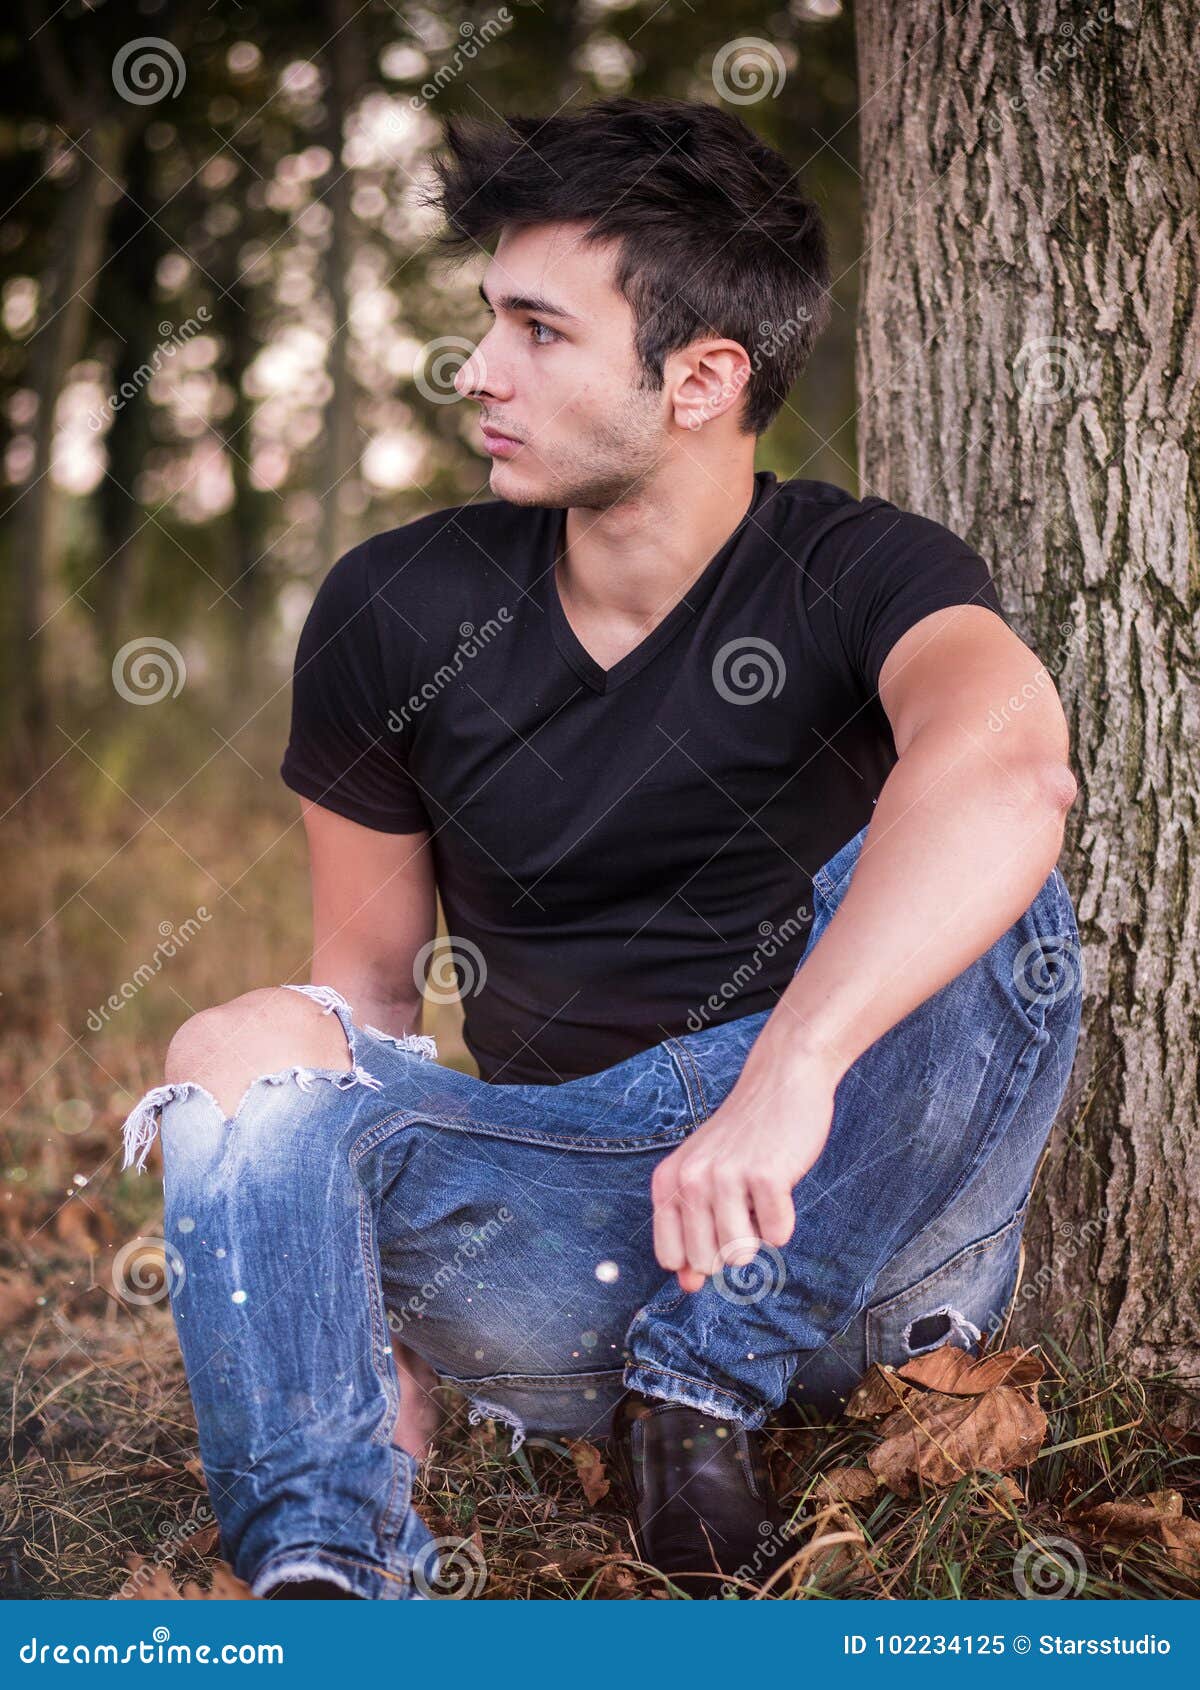 Attractive Young Man in Park Resting Against Tree Stock Image - Image ...